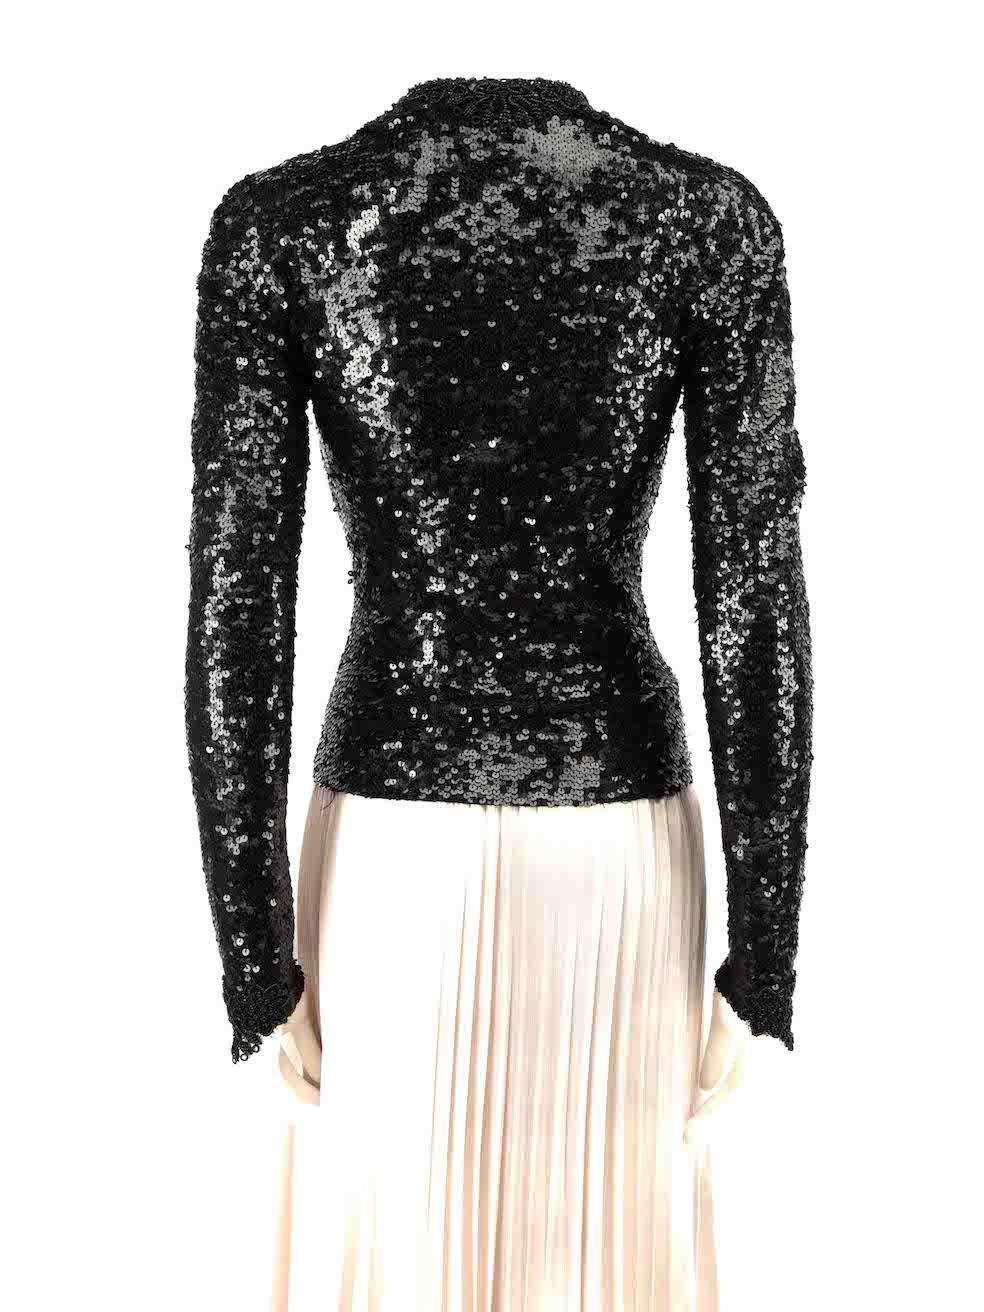 PAROSH Black Beaded Sequinned Jacket Size XS In Good Condition For Sale In London, GB